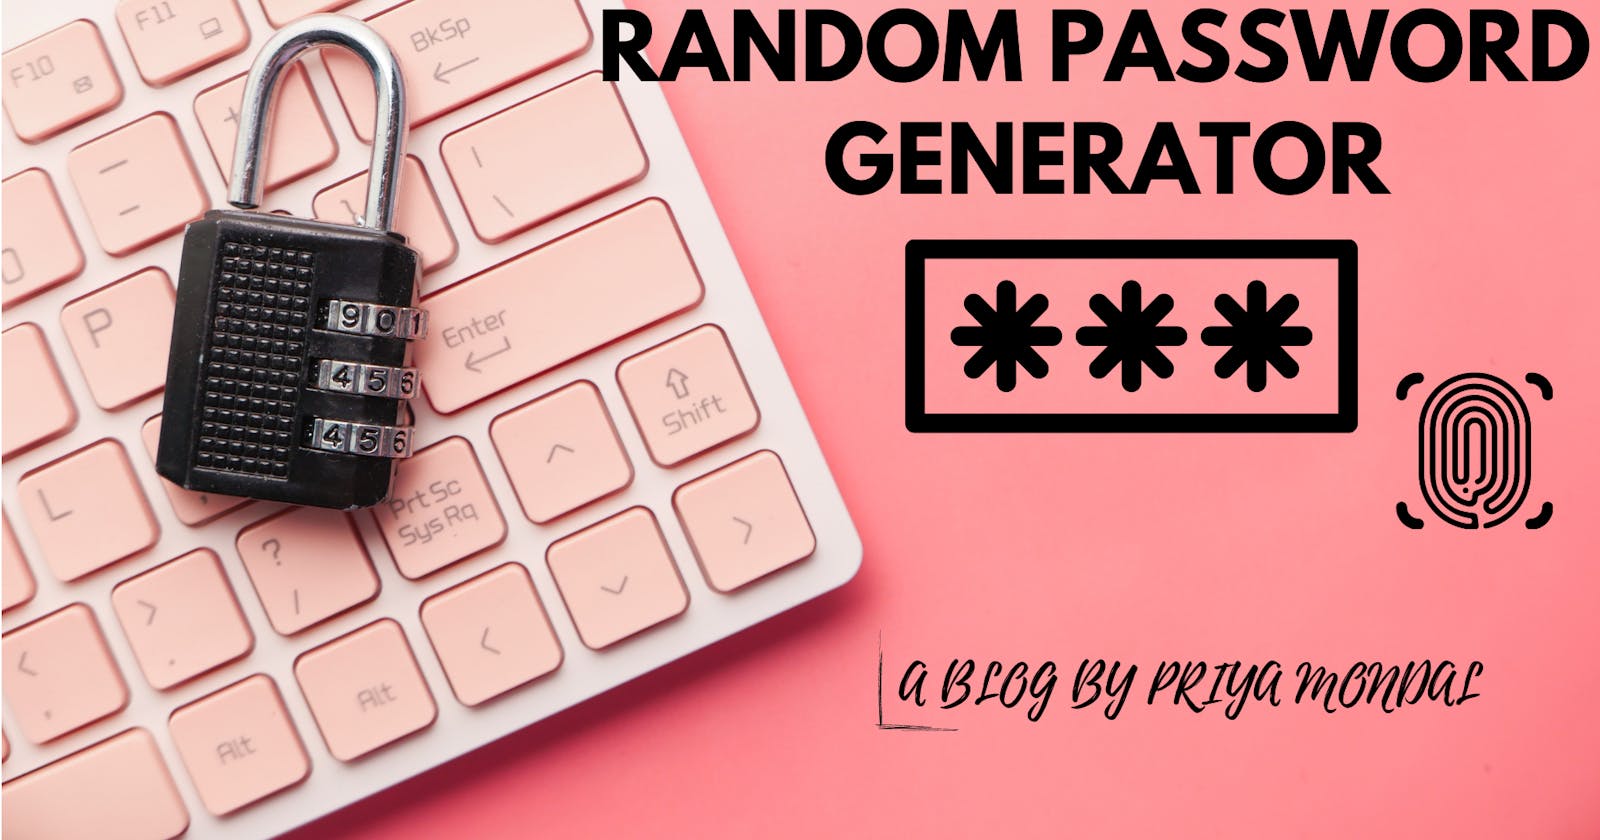 Confused about Password choice? Build a Random Password Generator